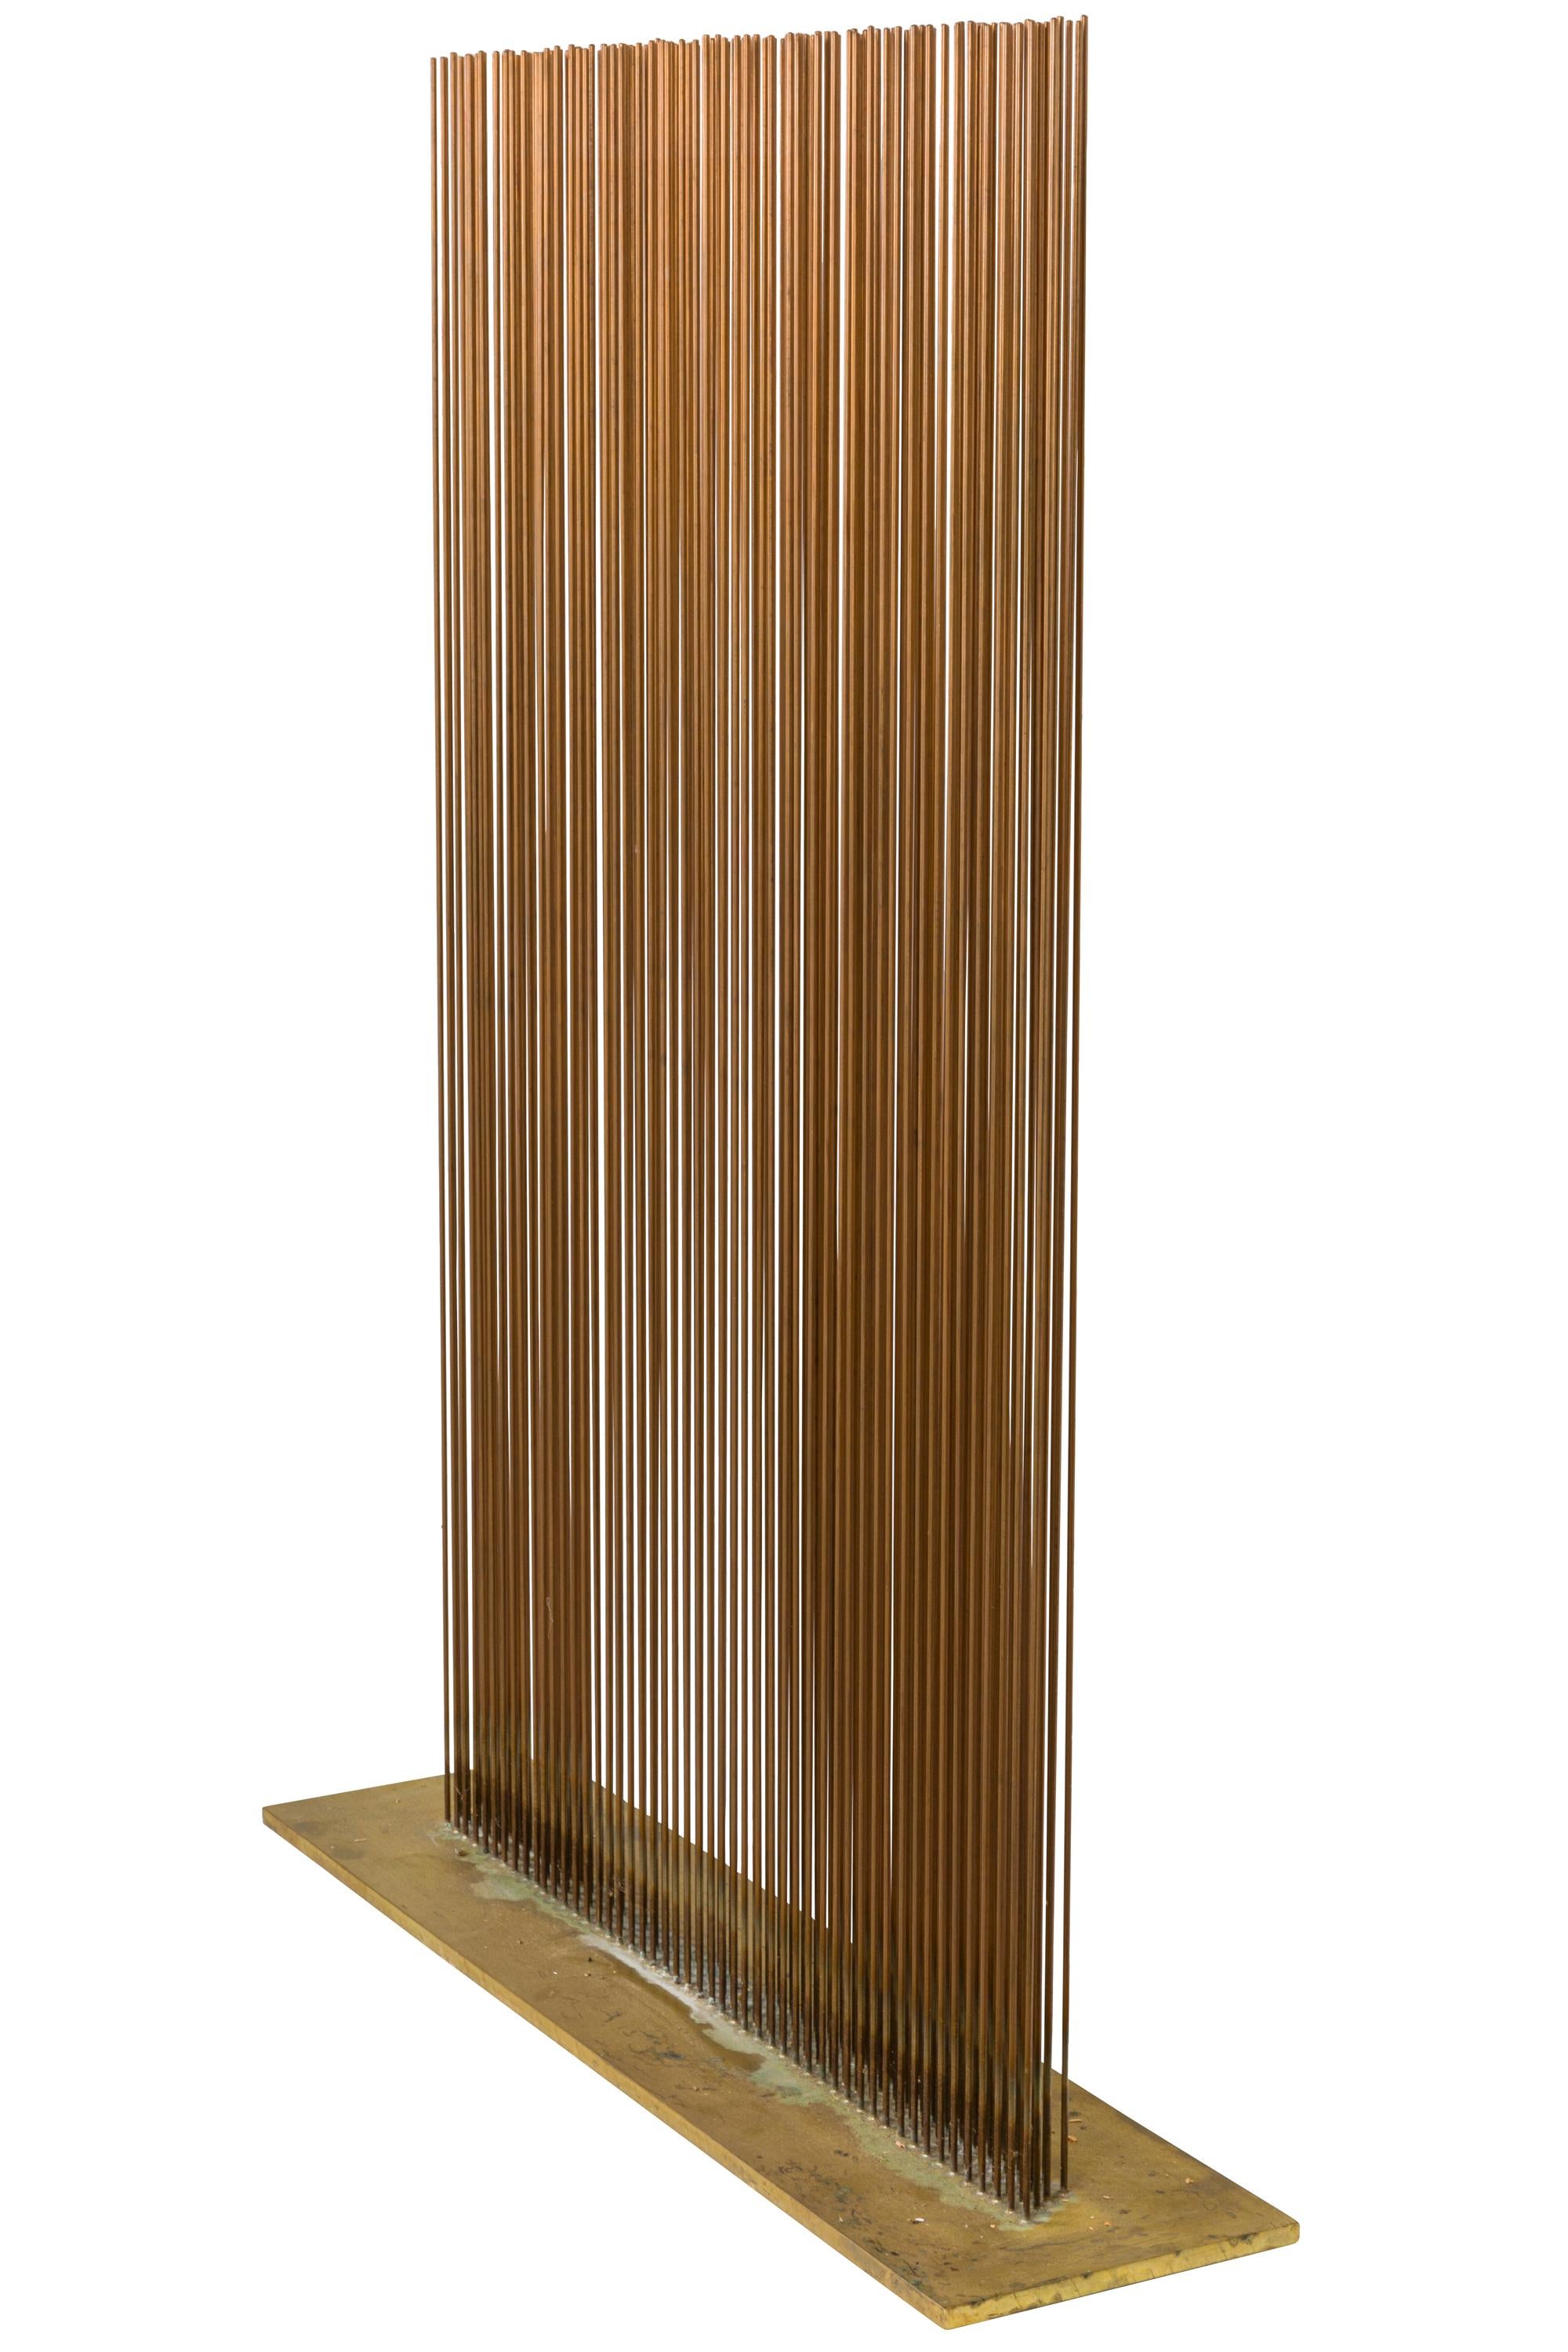 A great form this sonambient sculpture by Val Bertoia possesses the finest qualities of sound and movement the sculptures are known for. The length of each rod allows for maximum sway, the entire piece displaying a lovely wave motion when stroked,